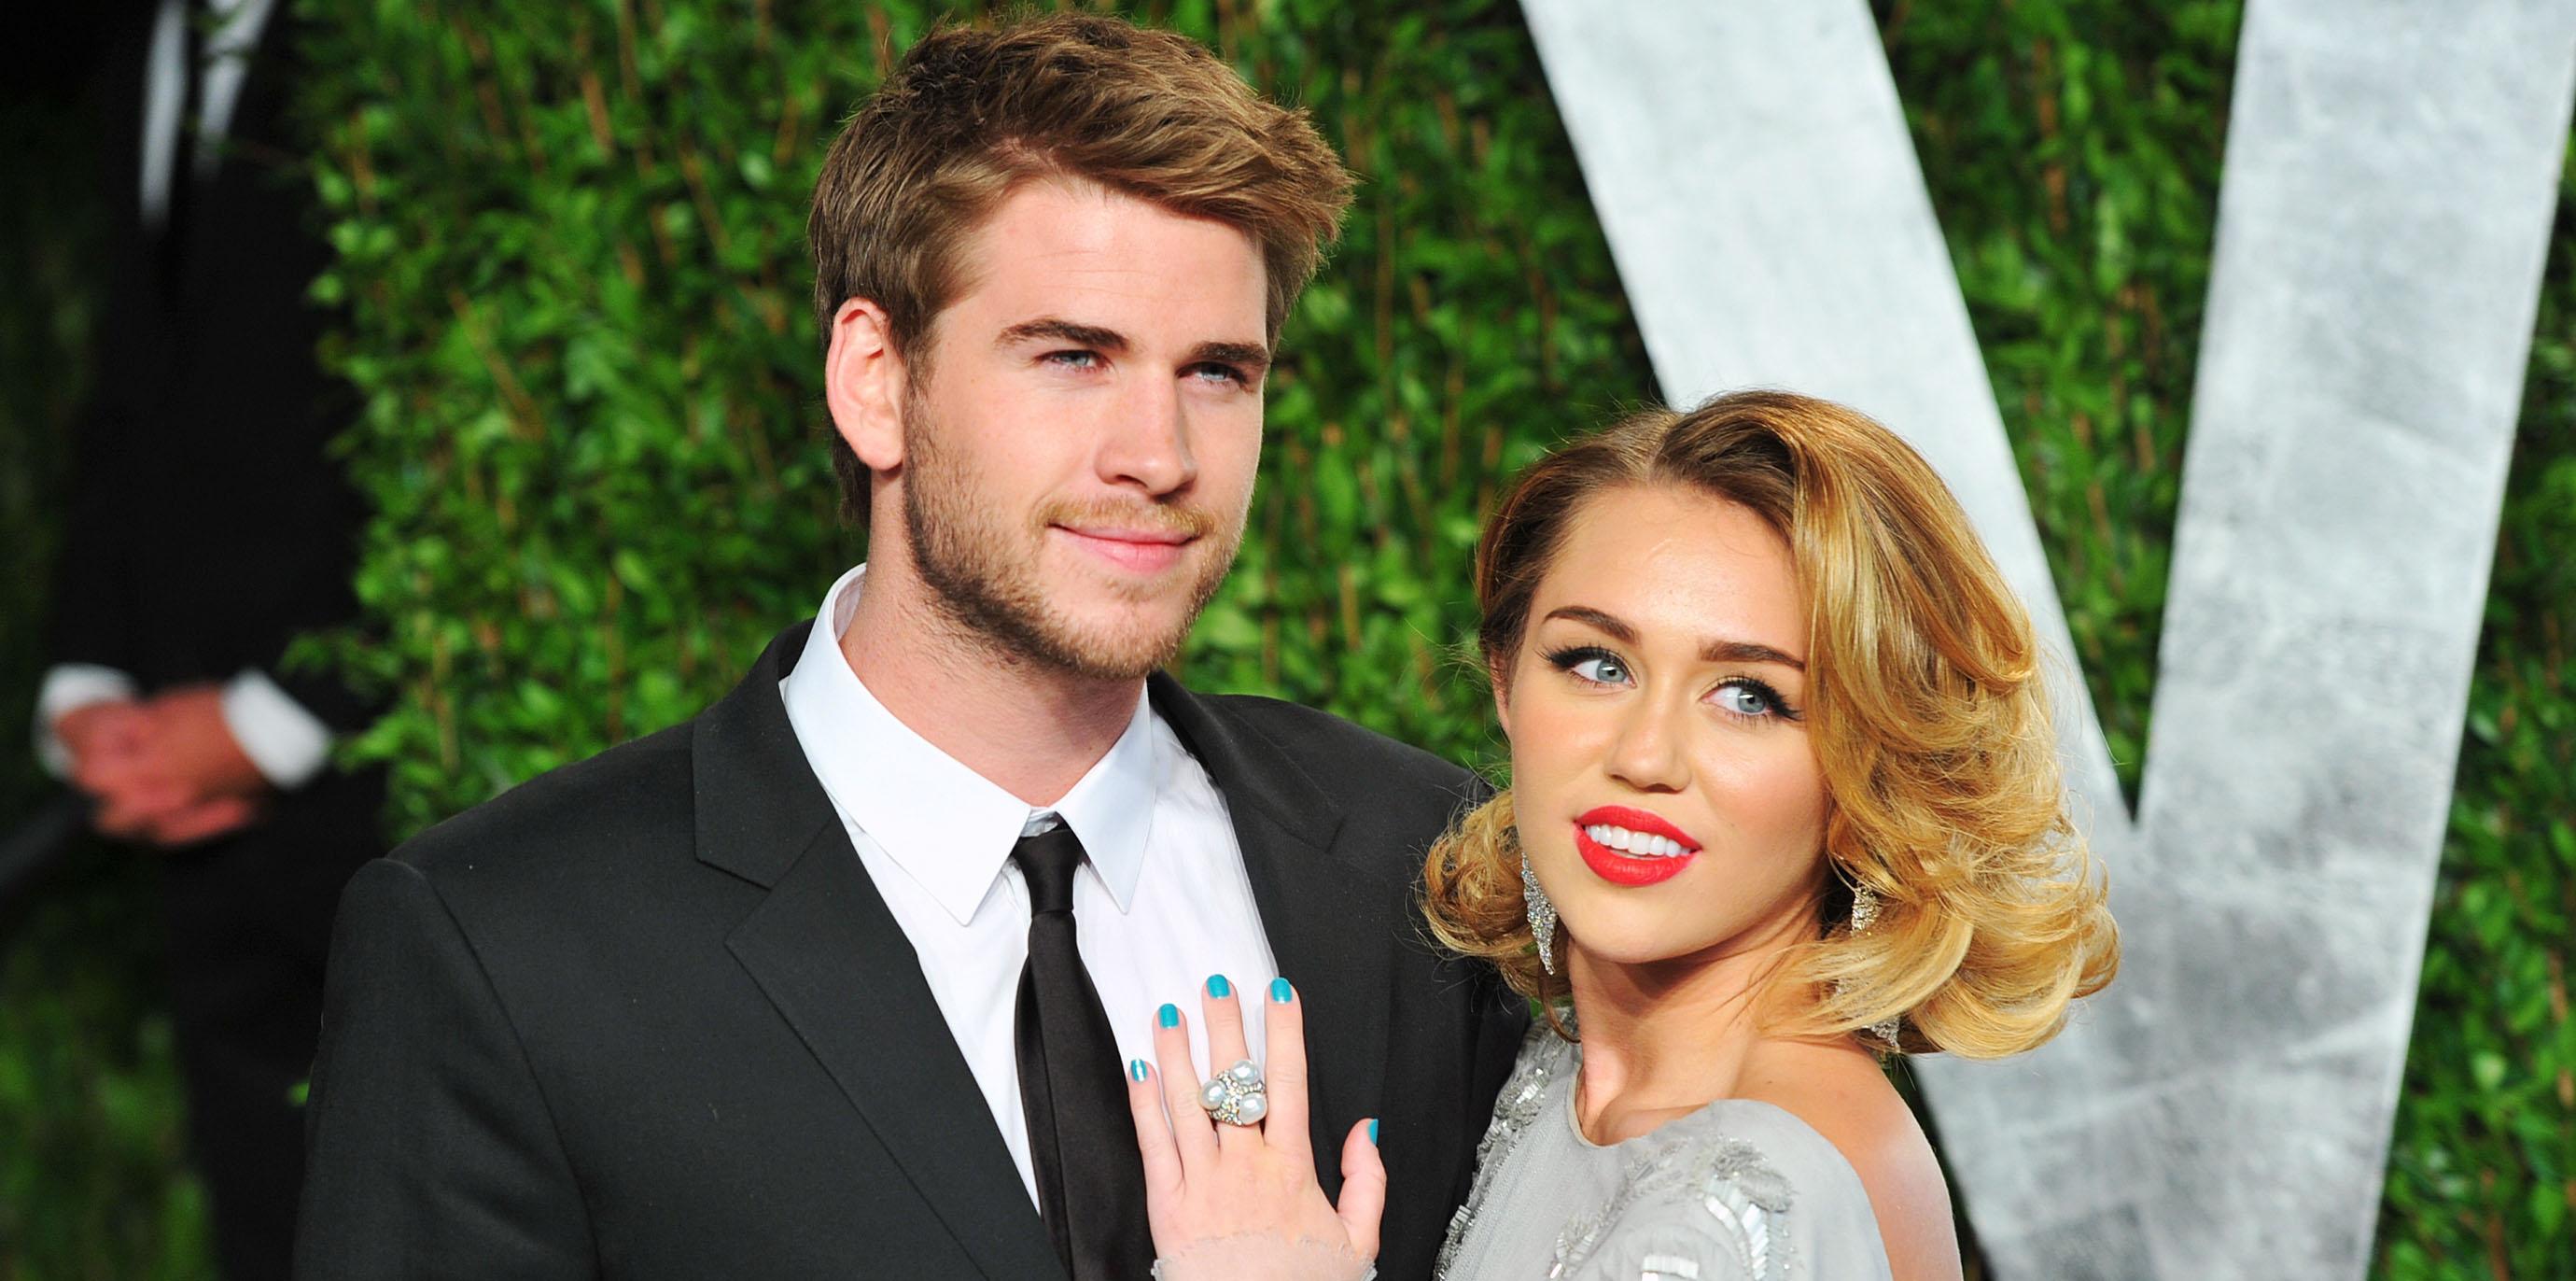 Miley Cyrus Liam Hemsworth Want To Reignite Their On Screen Romance In The Last Song Sequel